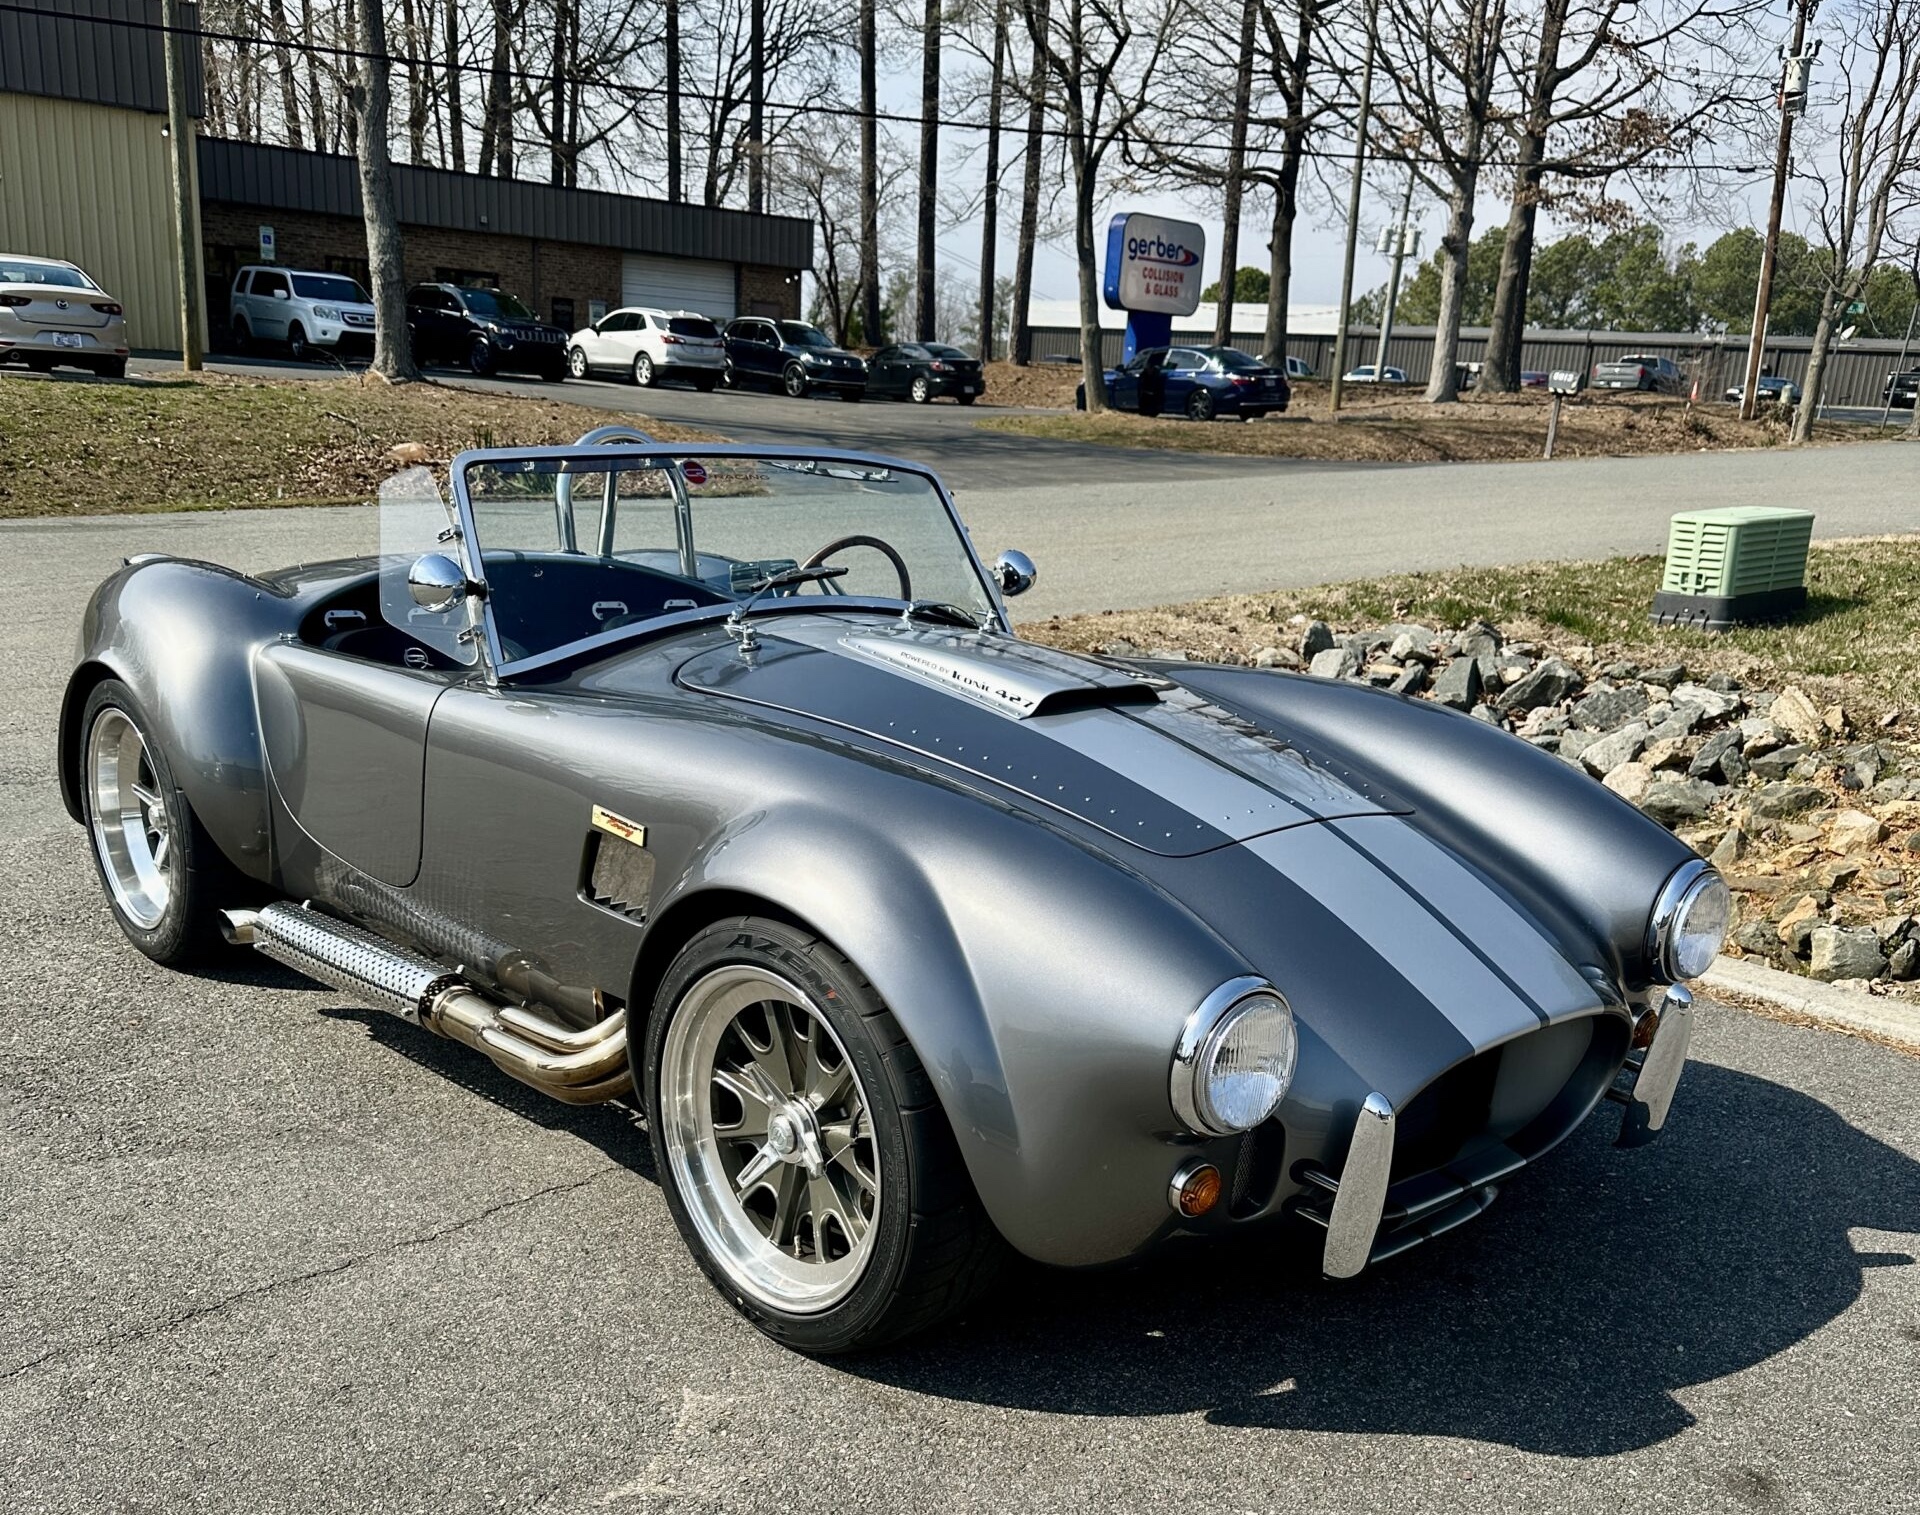 Enhancing the Appeal: Ceramic Coating of a 1965 Ford Shelby Cobra Replica